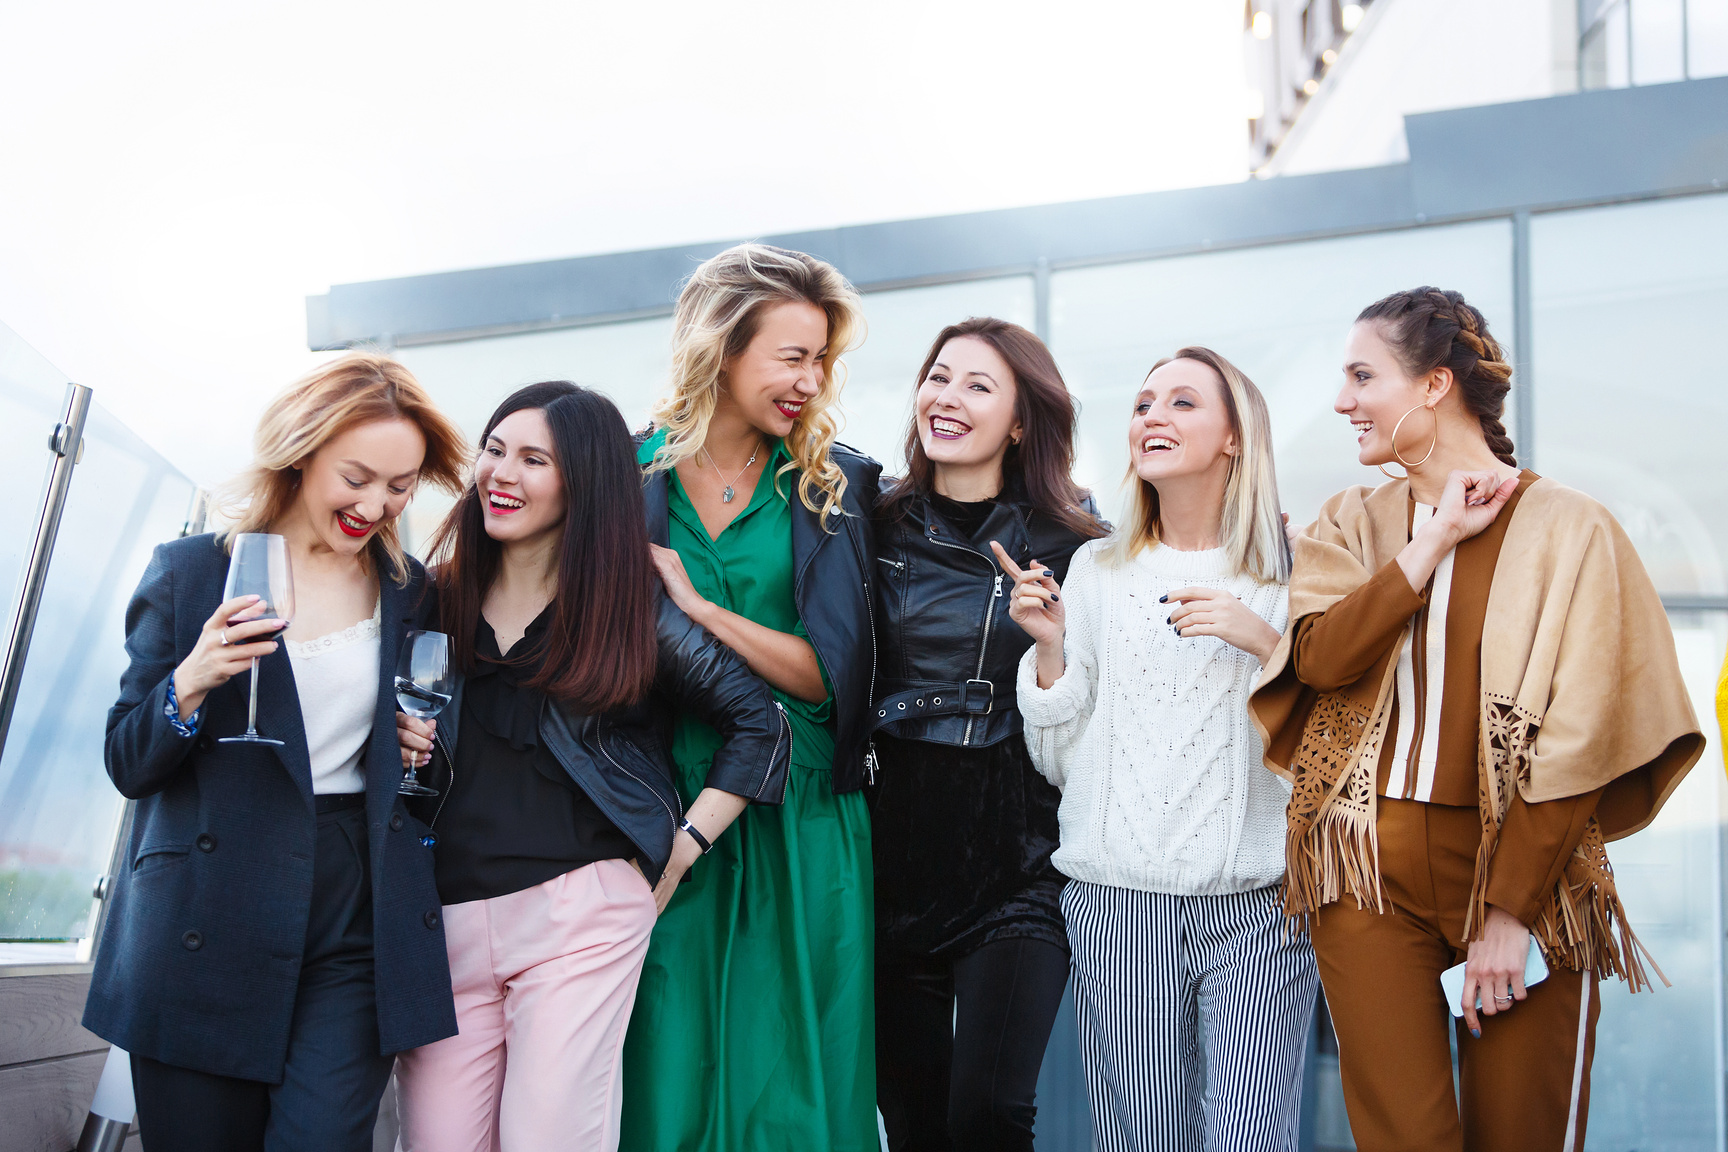 Team of women celebrating a corporate party